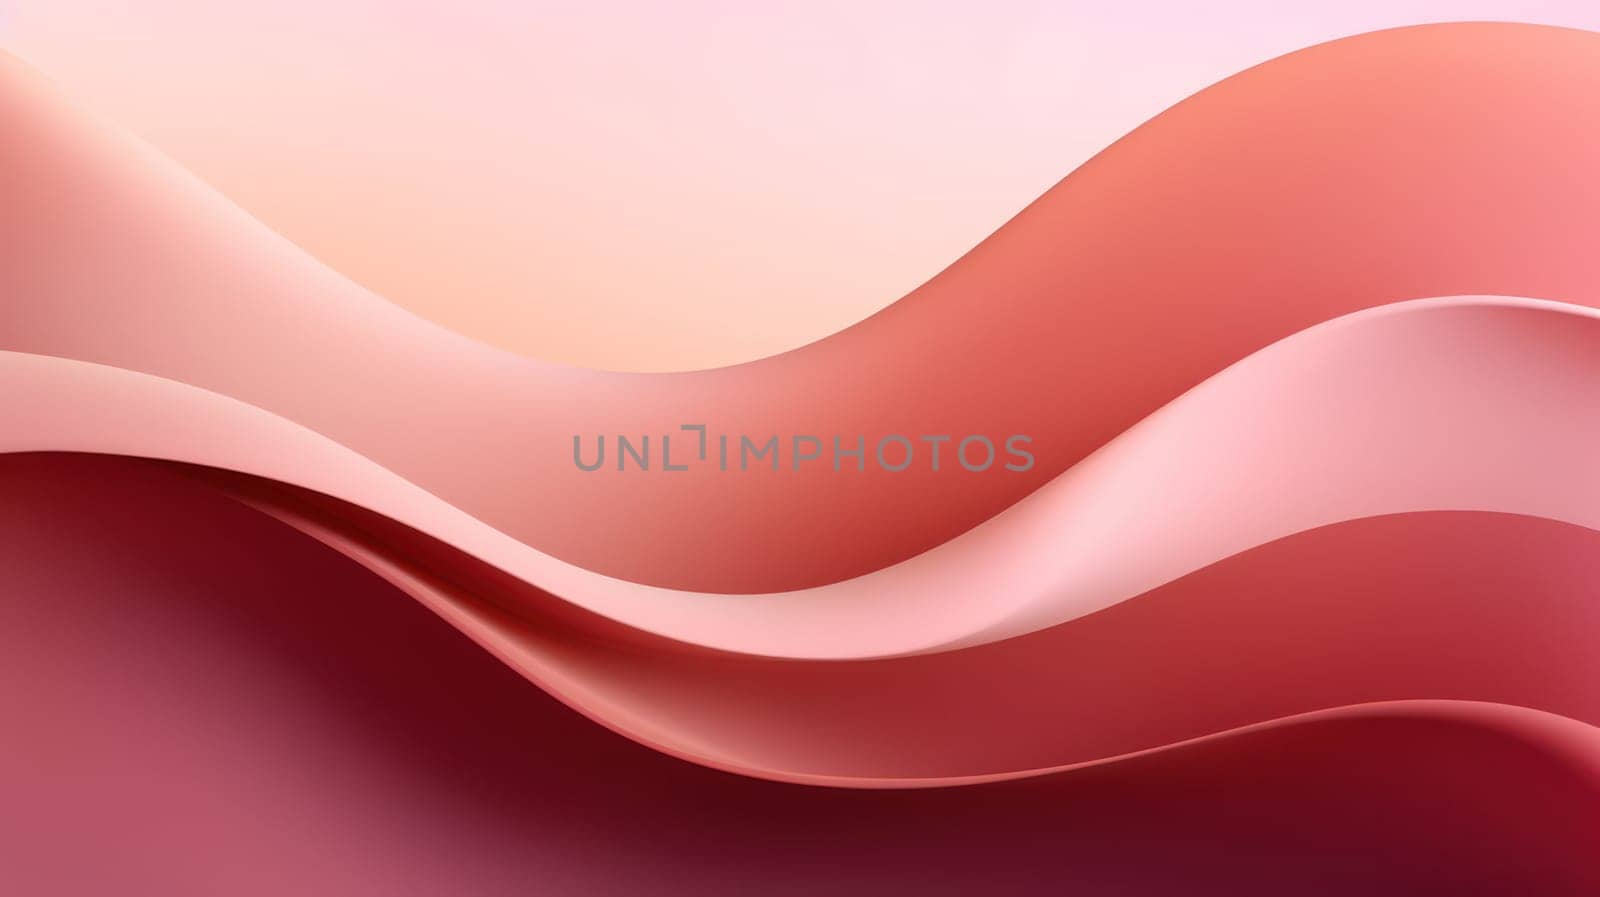 Abstract Design: Bright Curves and Waves - A Modern Illustration of Gradient Pink Wallpaper, with a Fluid and Dynamic Motion